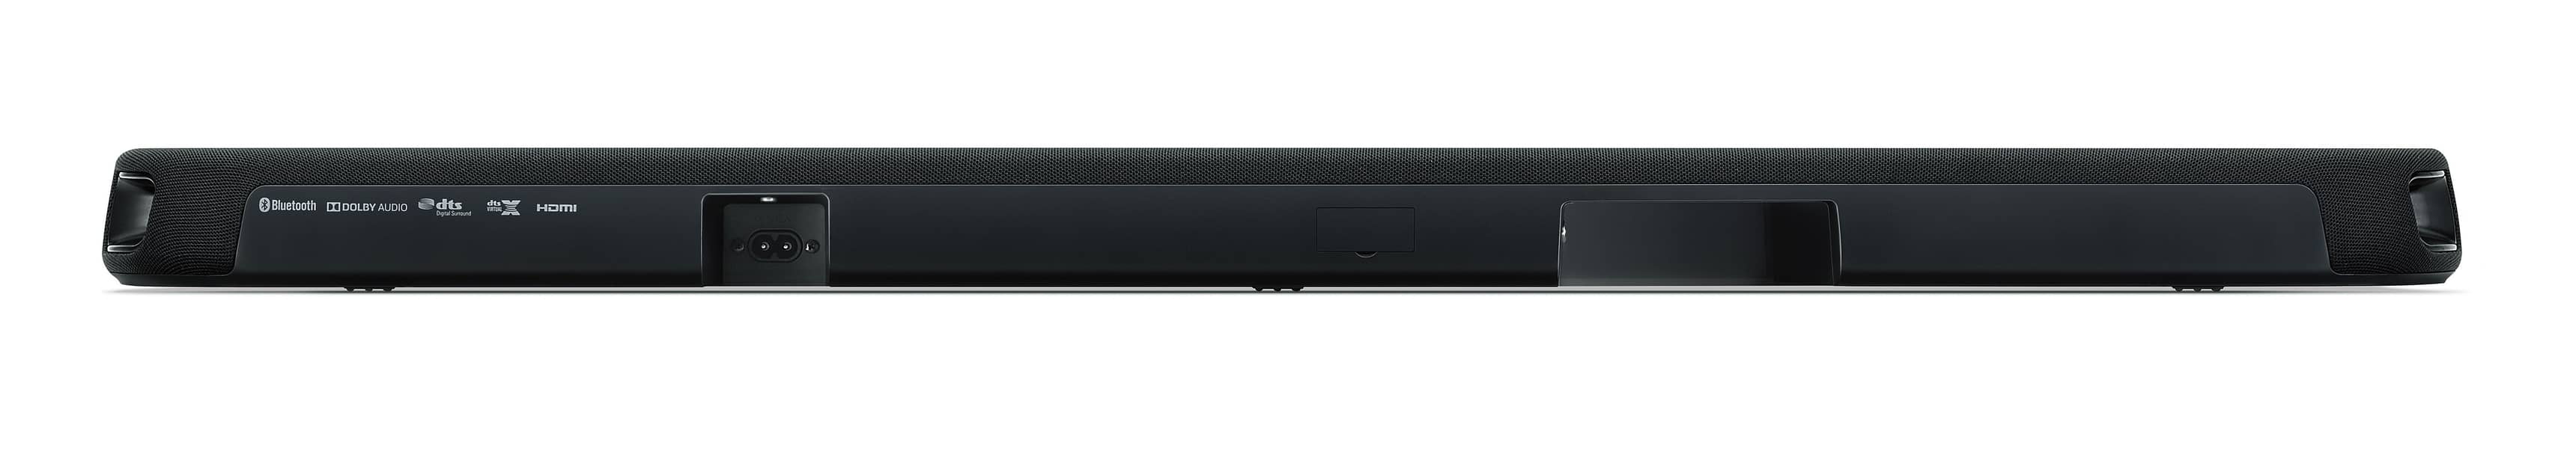 Orignal Yamaha ATS-1080 Sound bar with Built-in Subwoofers With remote 7